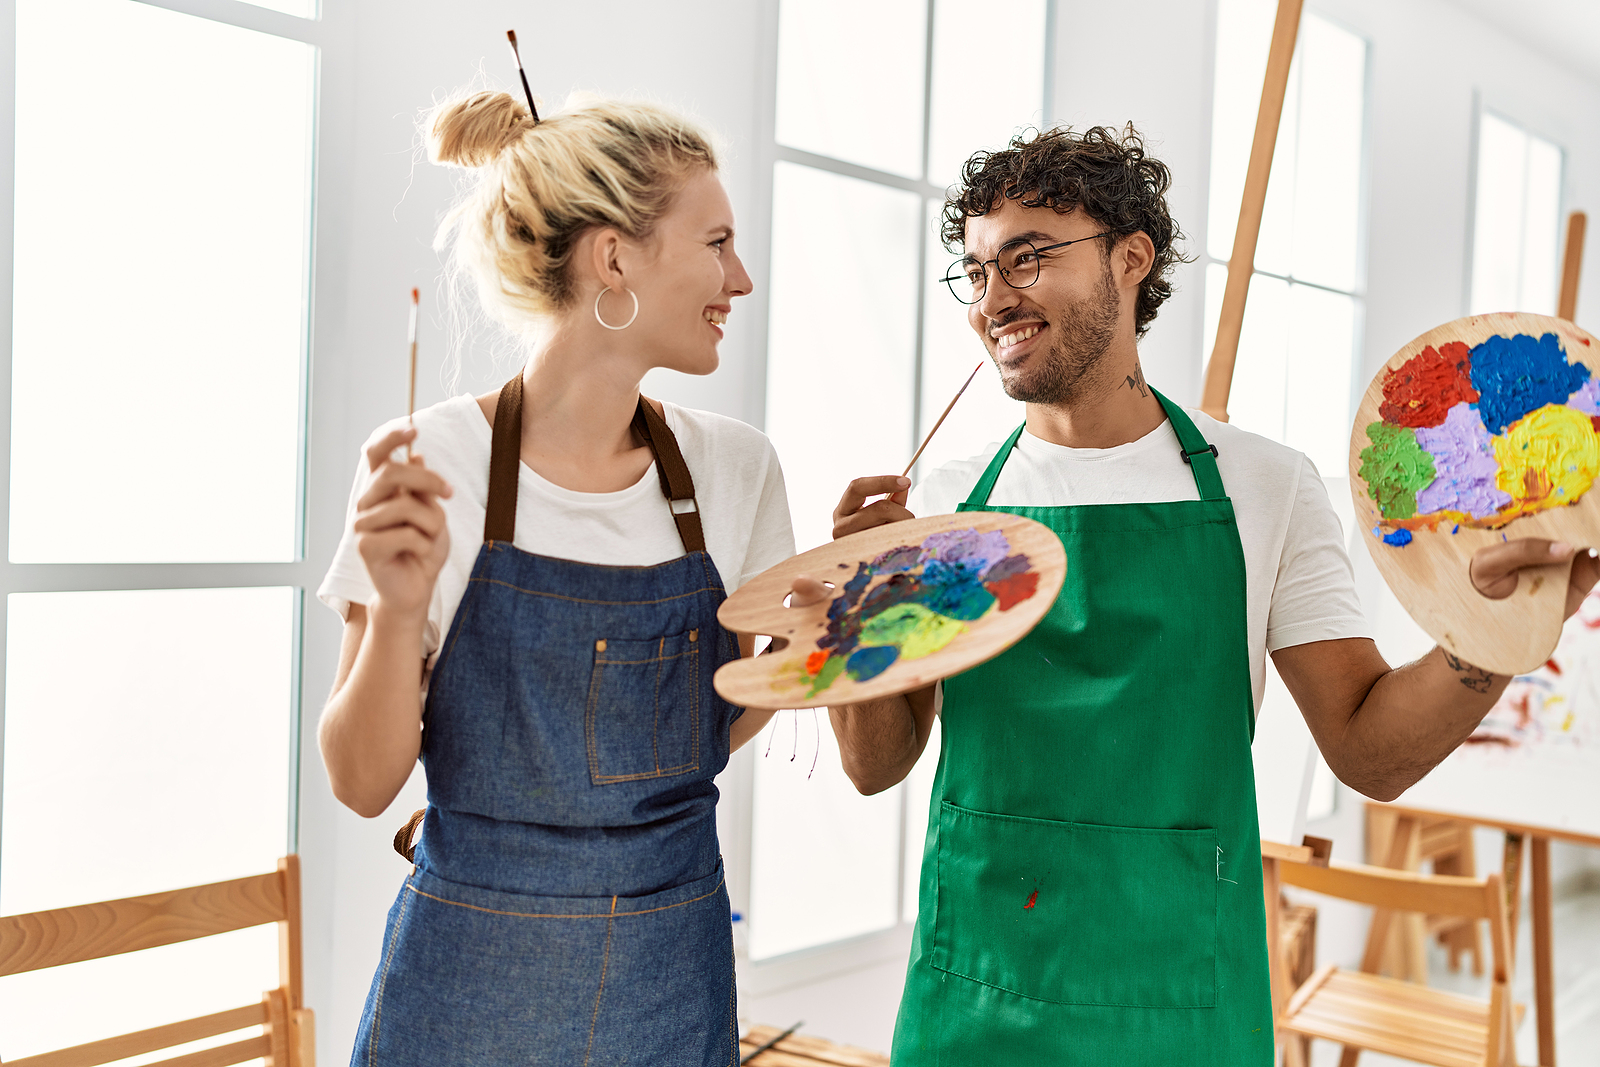 An attractive man and woman laugh as they hold paint brushes in their hands. They are wearing aprons.